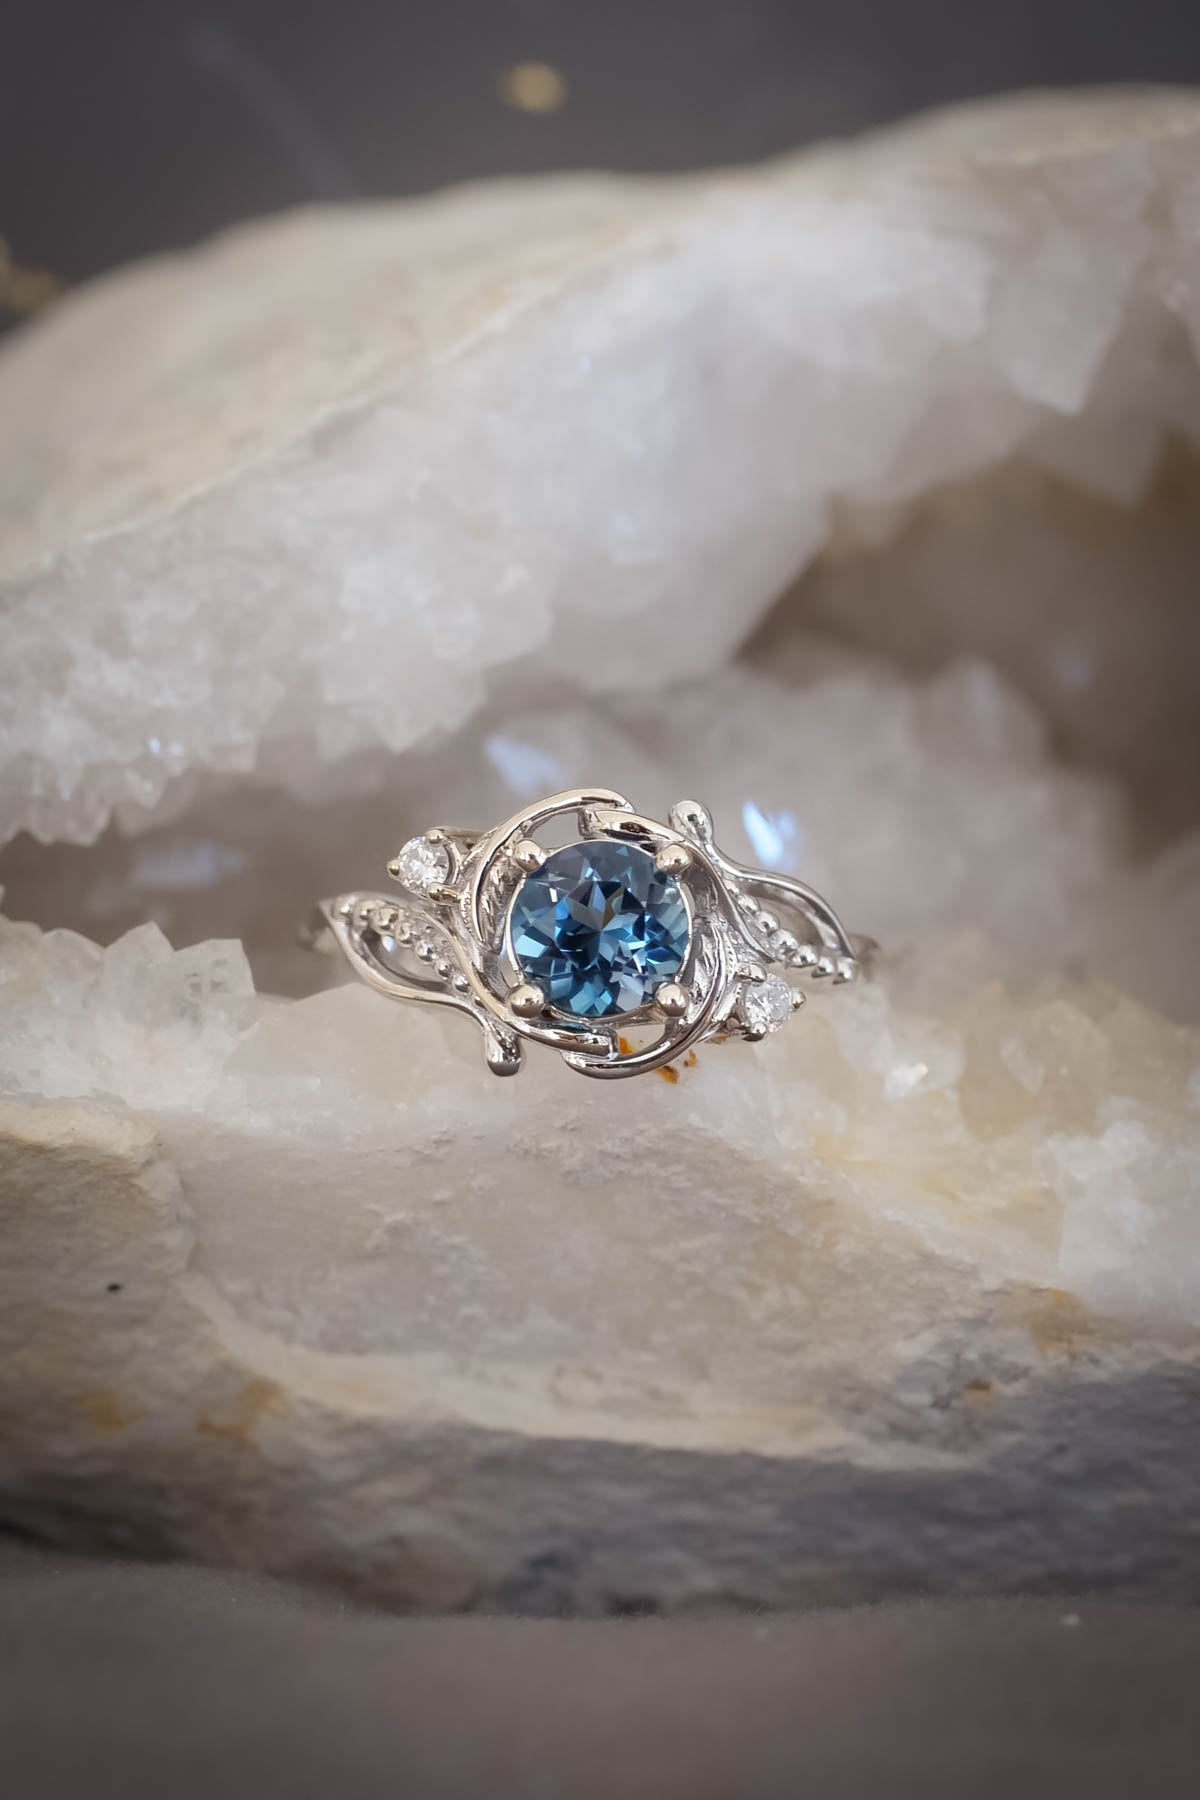 Is blue topaz good for an engagement ring? - Quora